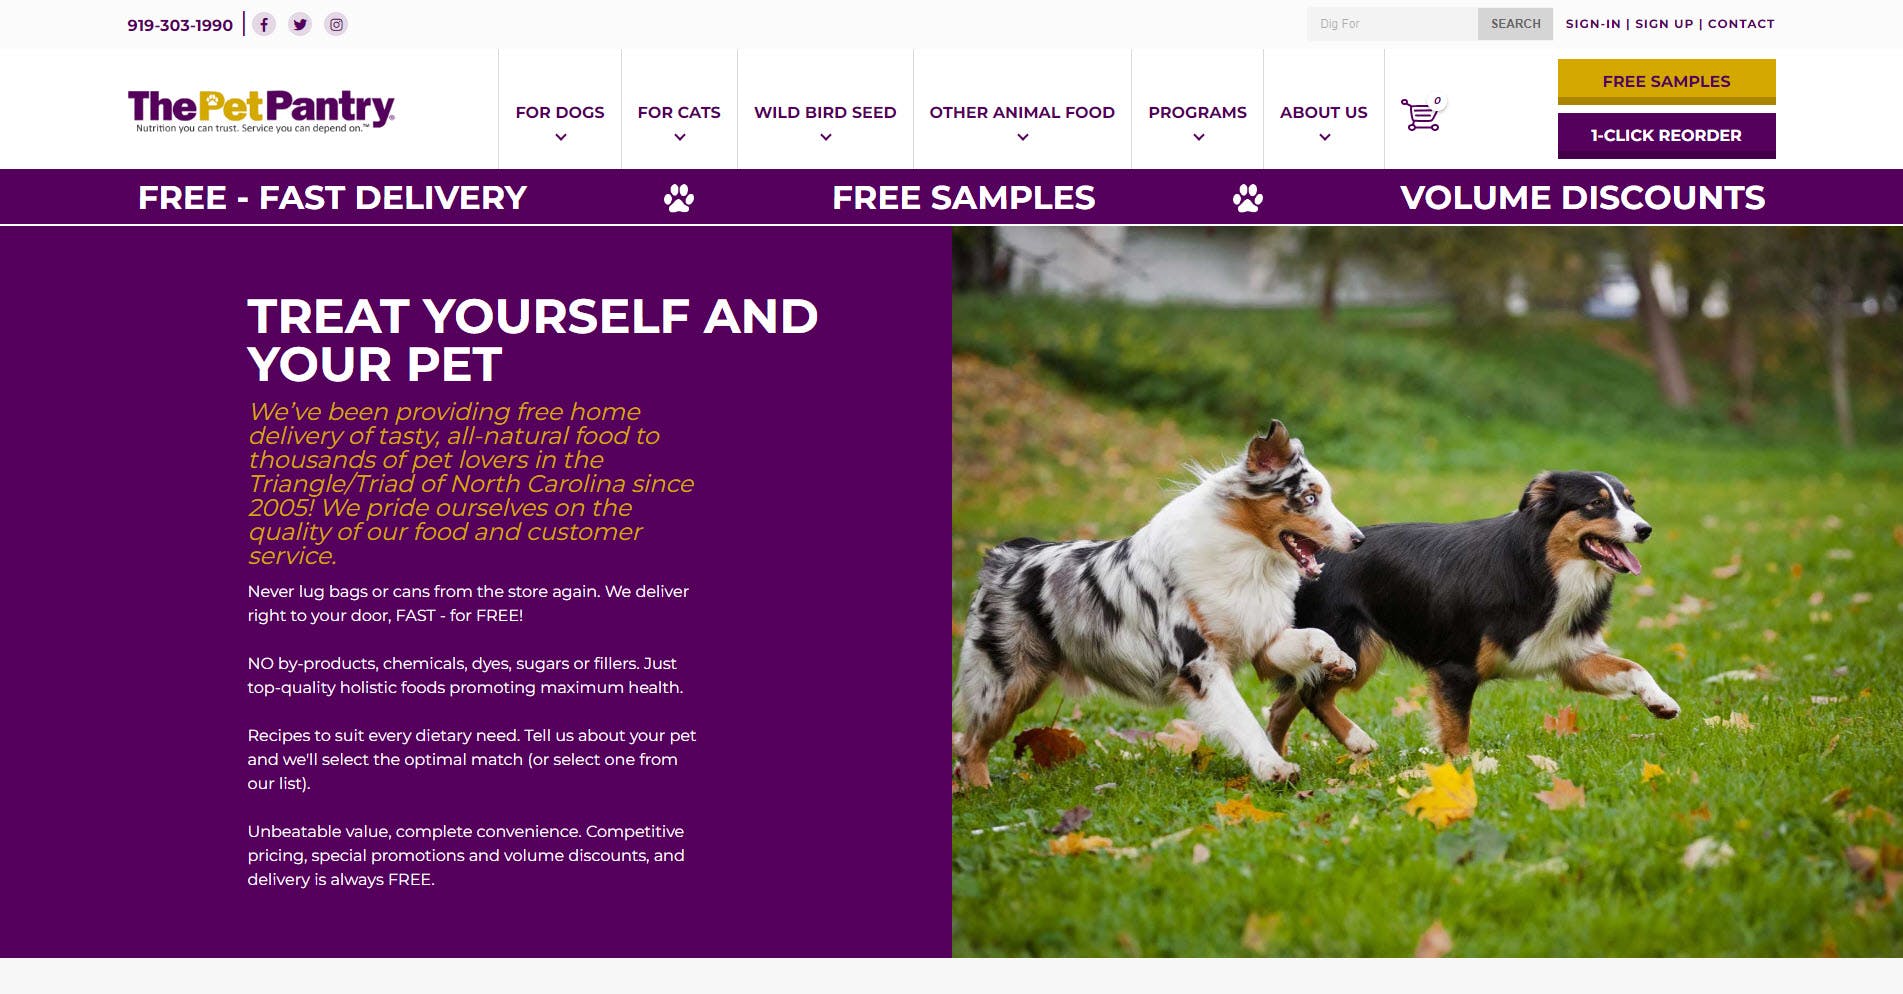 The Pet Pantry website with two dogs.